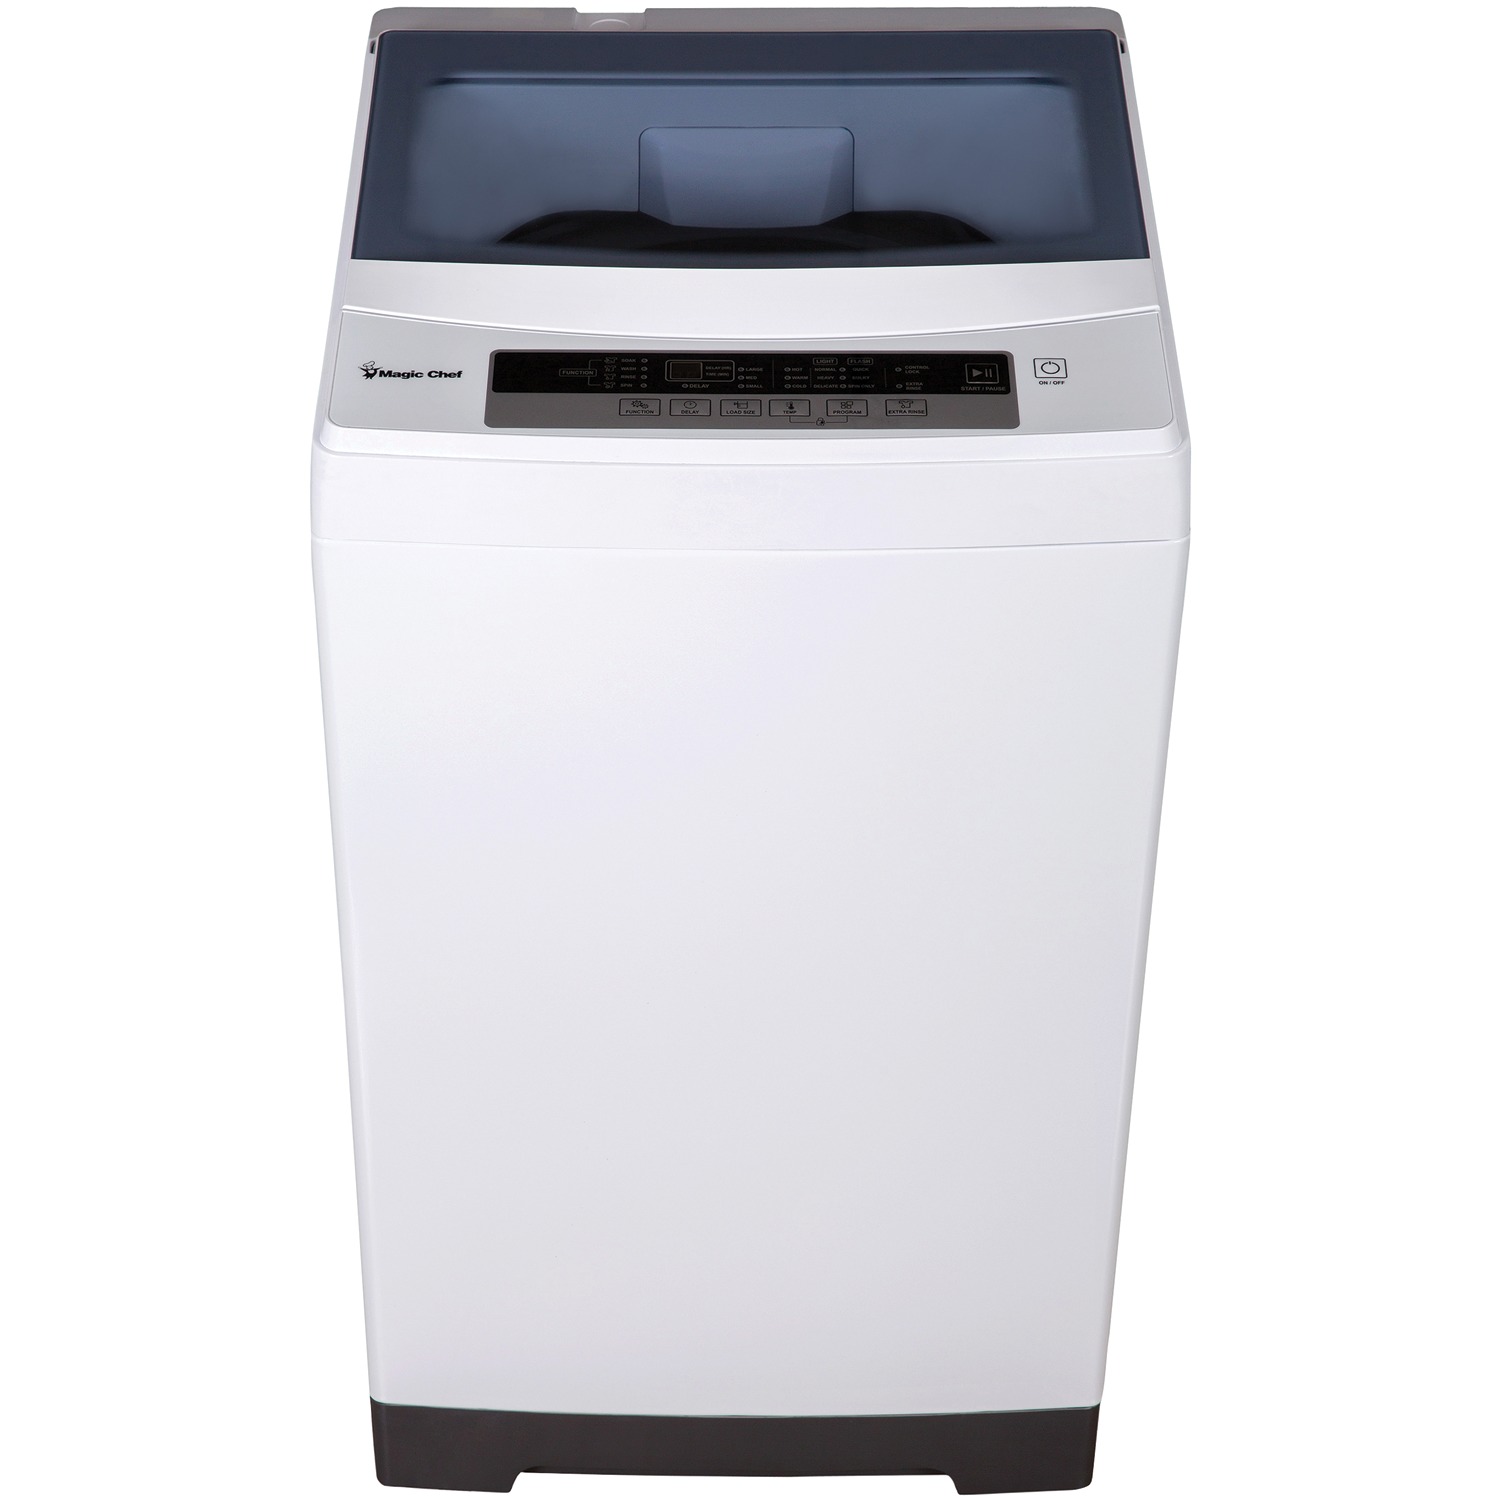 Magic Chef 1.6 cu. ft. Compact Portable Top-Load Washer, White - image 1 of 8